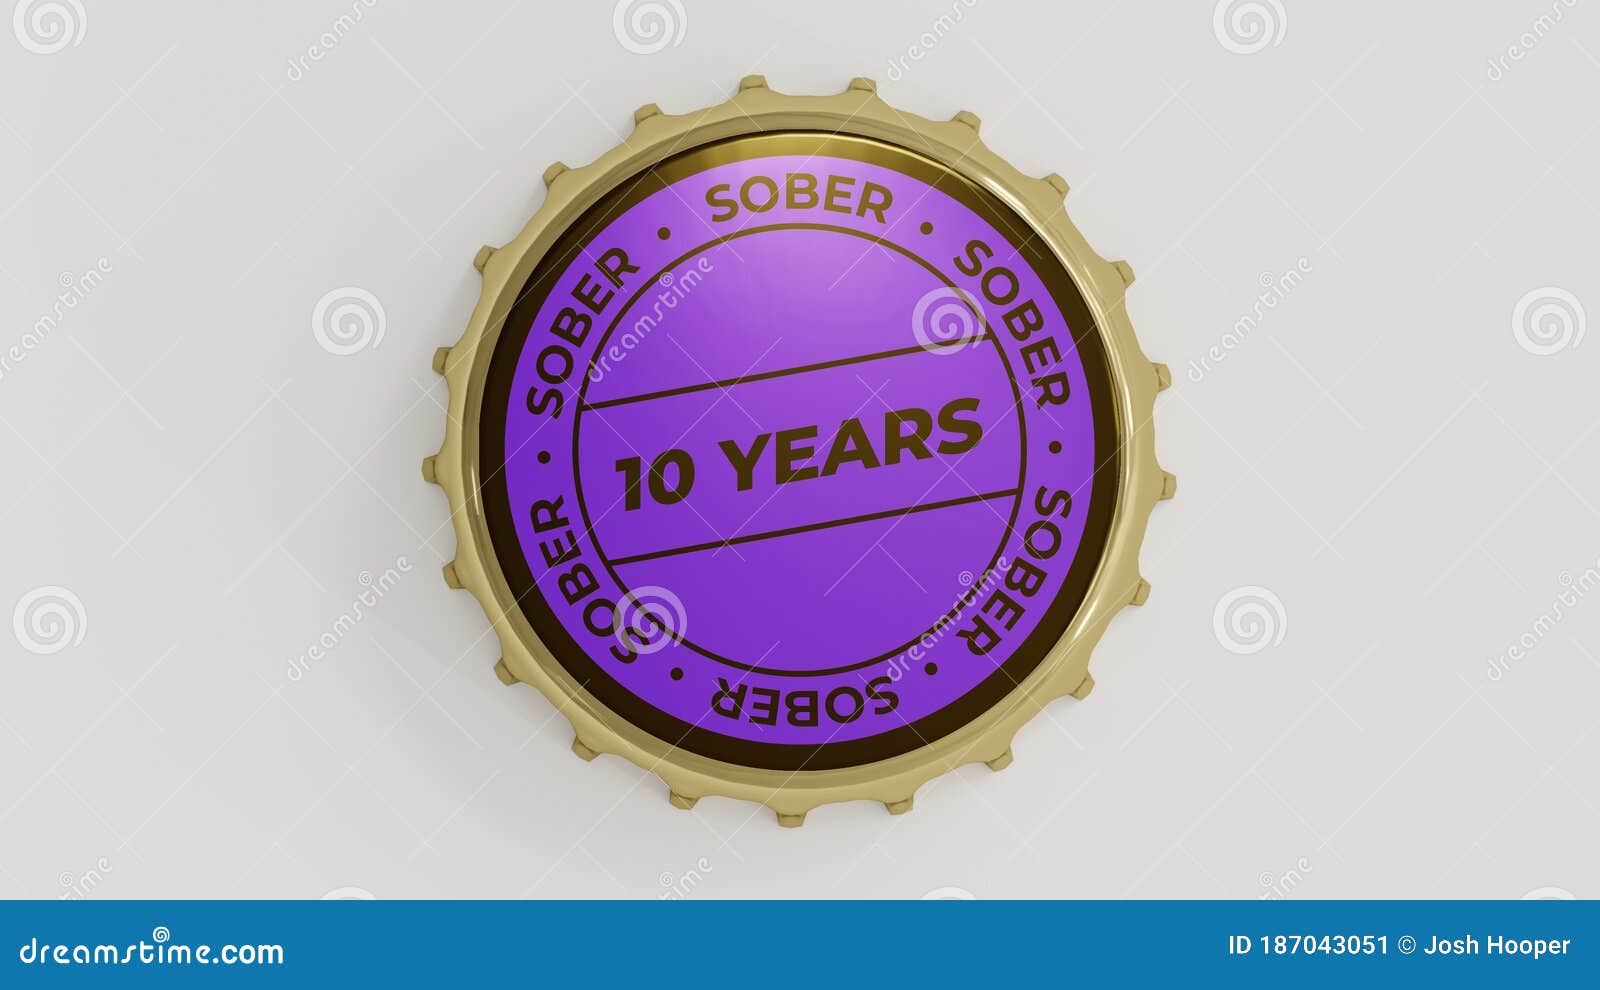 10 years sober. sobriety seal on a bottle cap